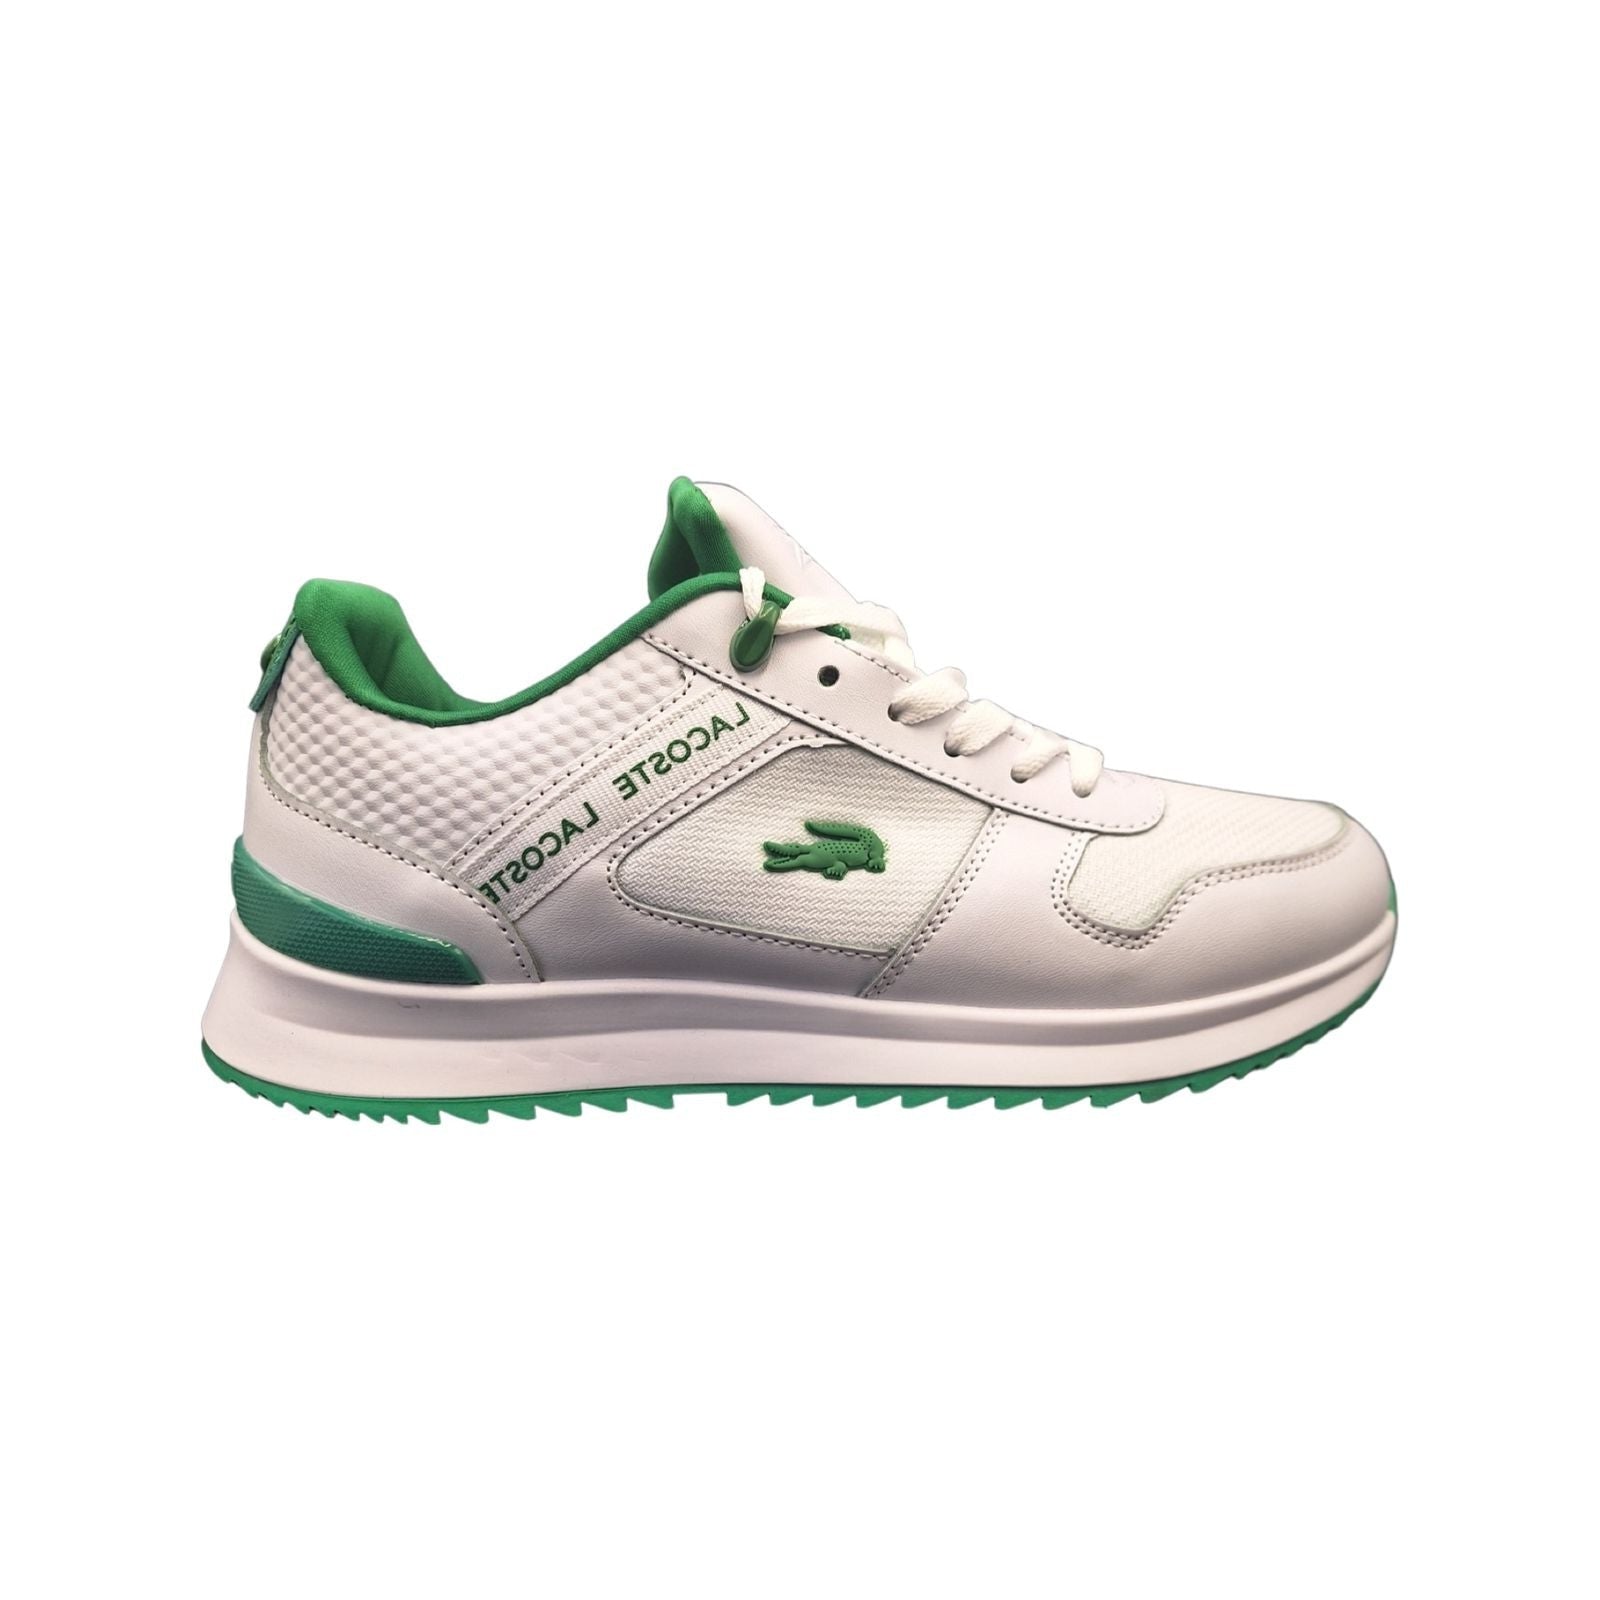 Lacoste Partner Luxe-White & Green - Soleful